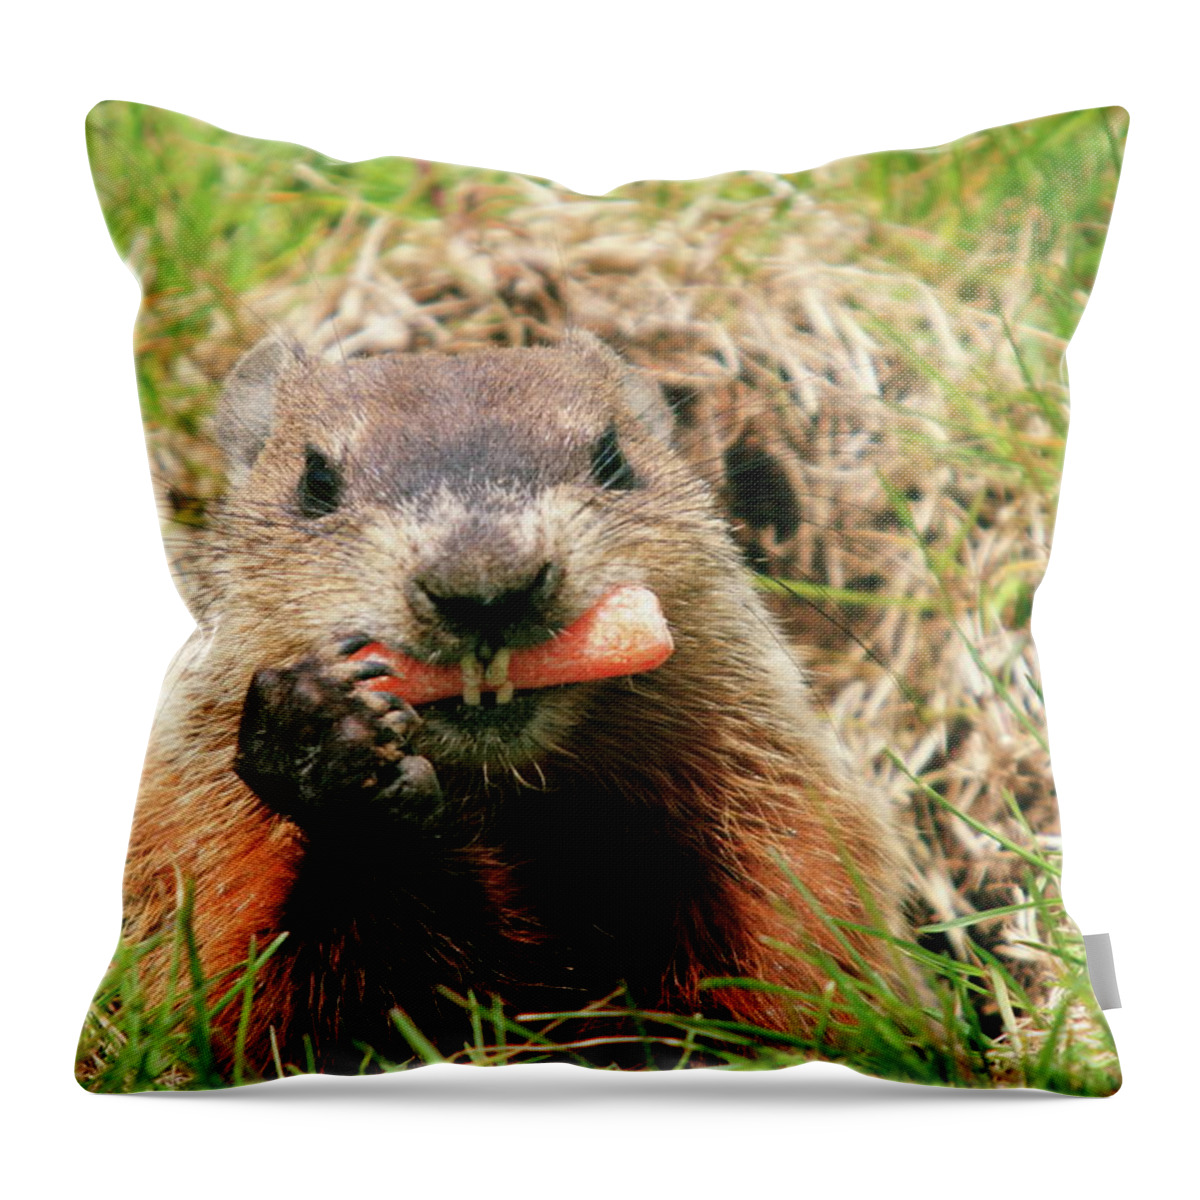 Grass Throw Pillow featuring the photograph Woodchuck In Hole Eating Carrot by David R. Tyner